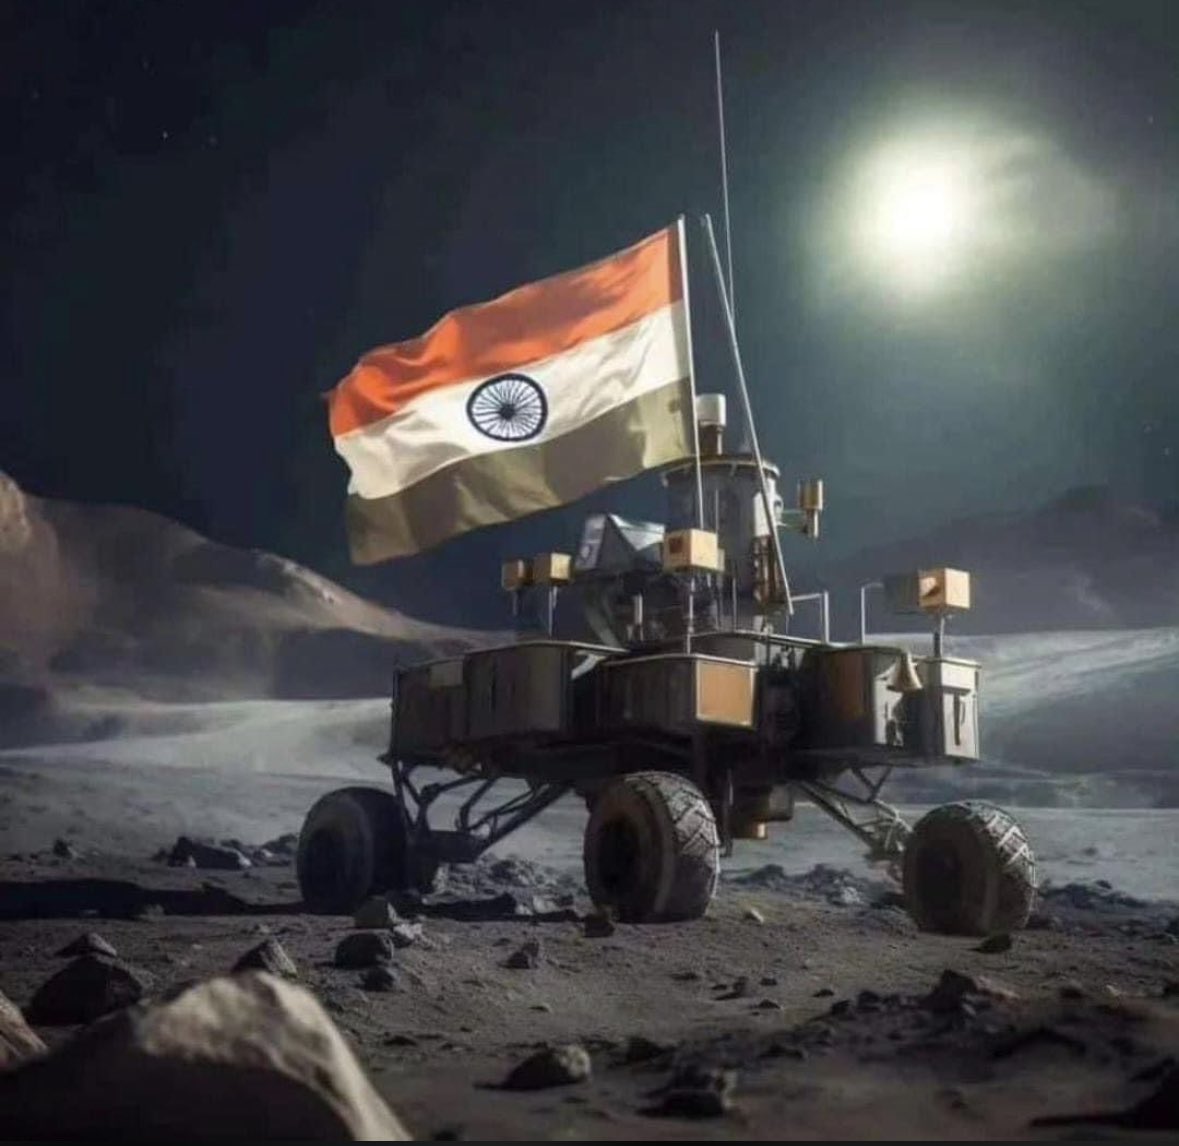 As Chandrayaan -3 touchdown the moon surface so gracefully. A giant leap for Indian Science, a monumental pride for our nation🇮🇳. @isro @elonmusk @MoneyGuruYT @ehsan786az @ezLearningExprt @cz_binance #Chandrayaan3 #Chandrayaan3Landing